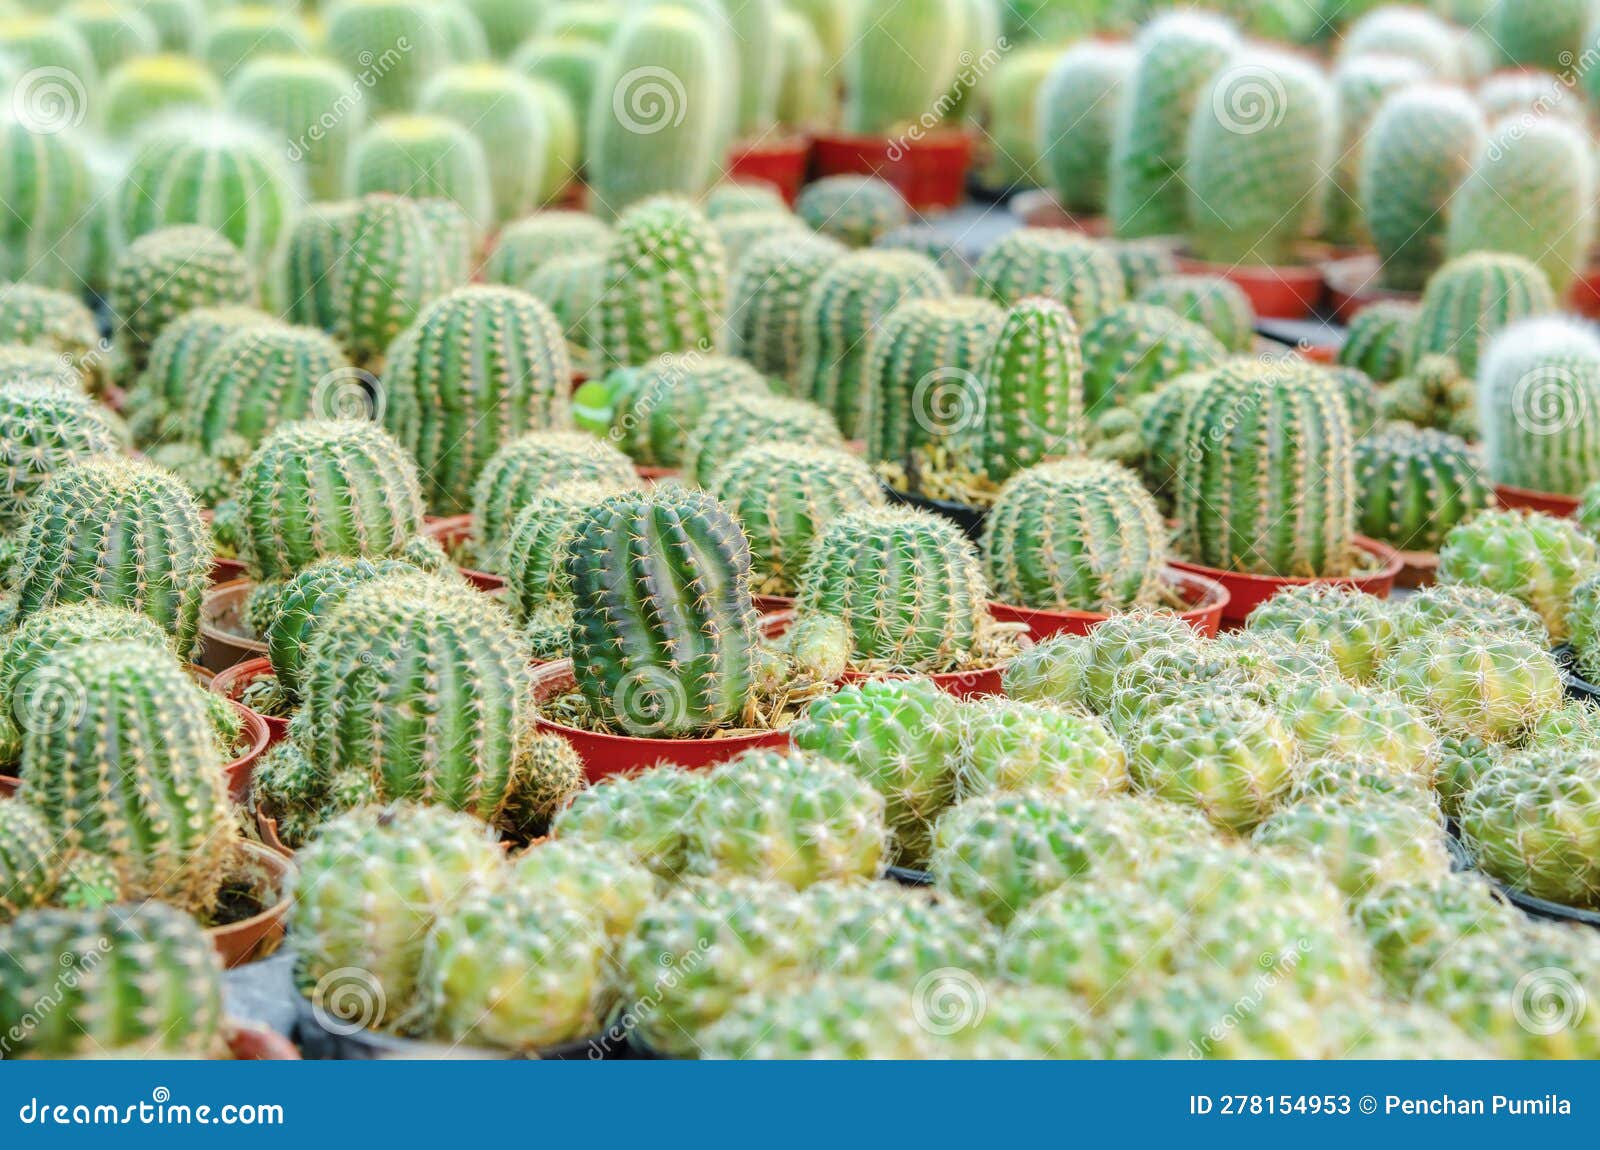 the plants of small cactus in floristeria, nature and decoration